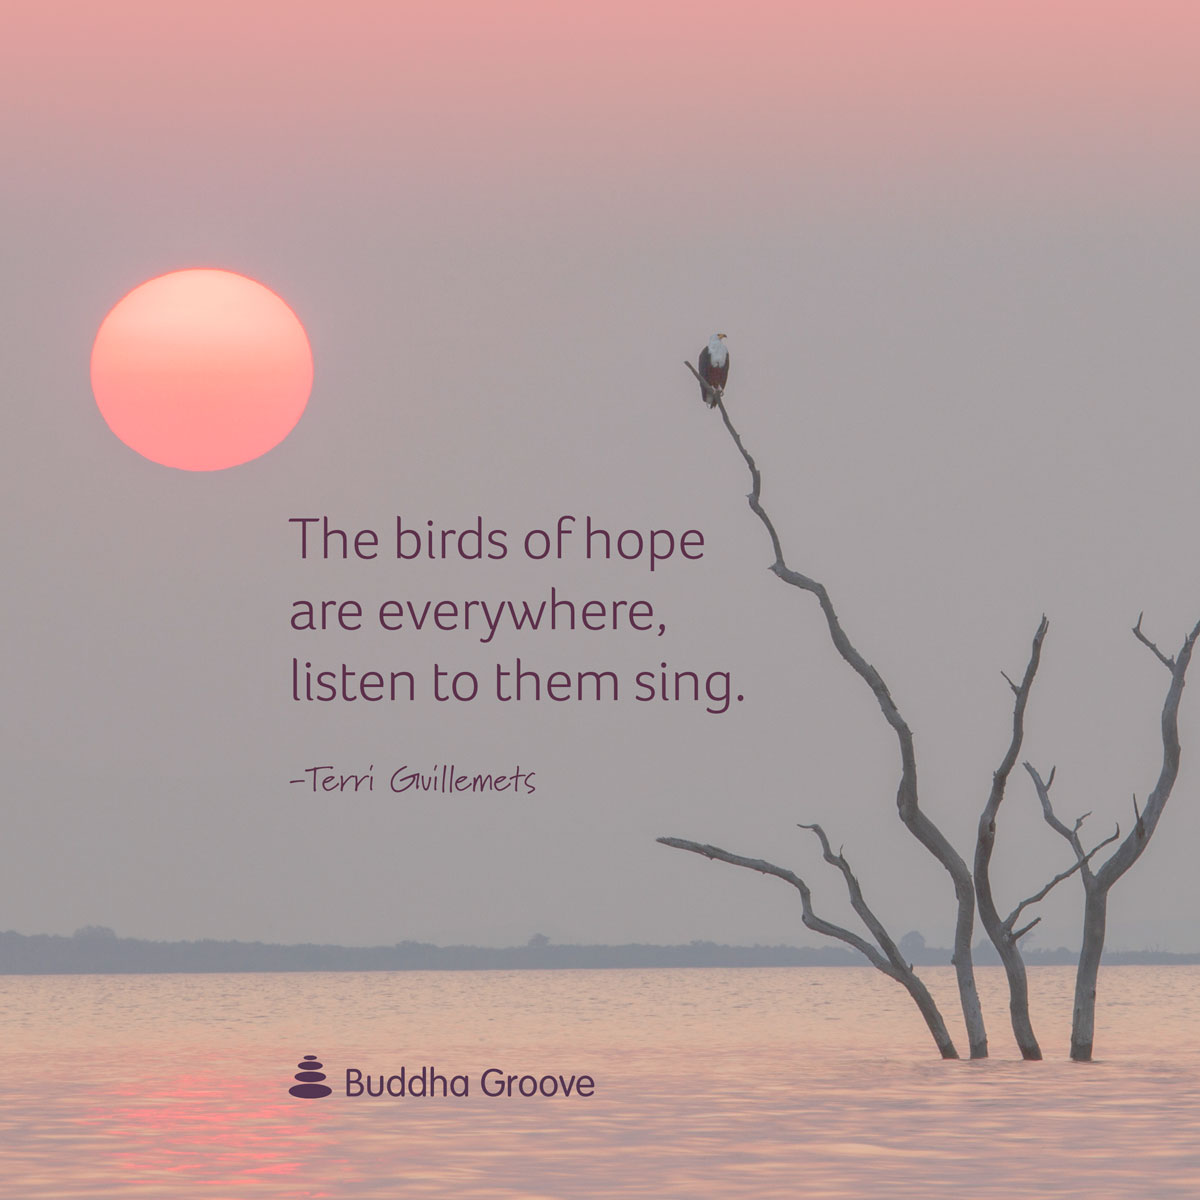 the birds of hope are everywhere, listen to them sing. terri grillenets